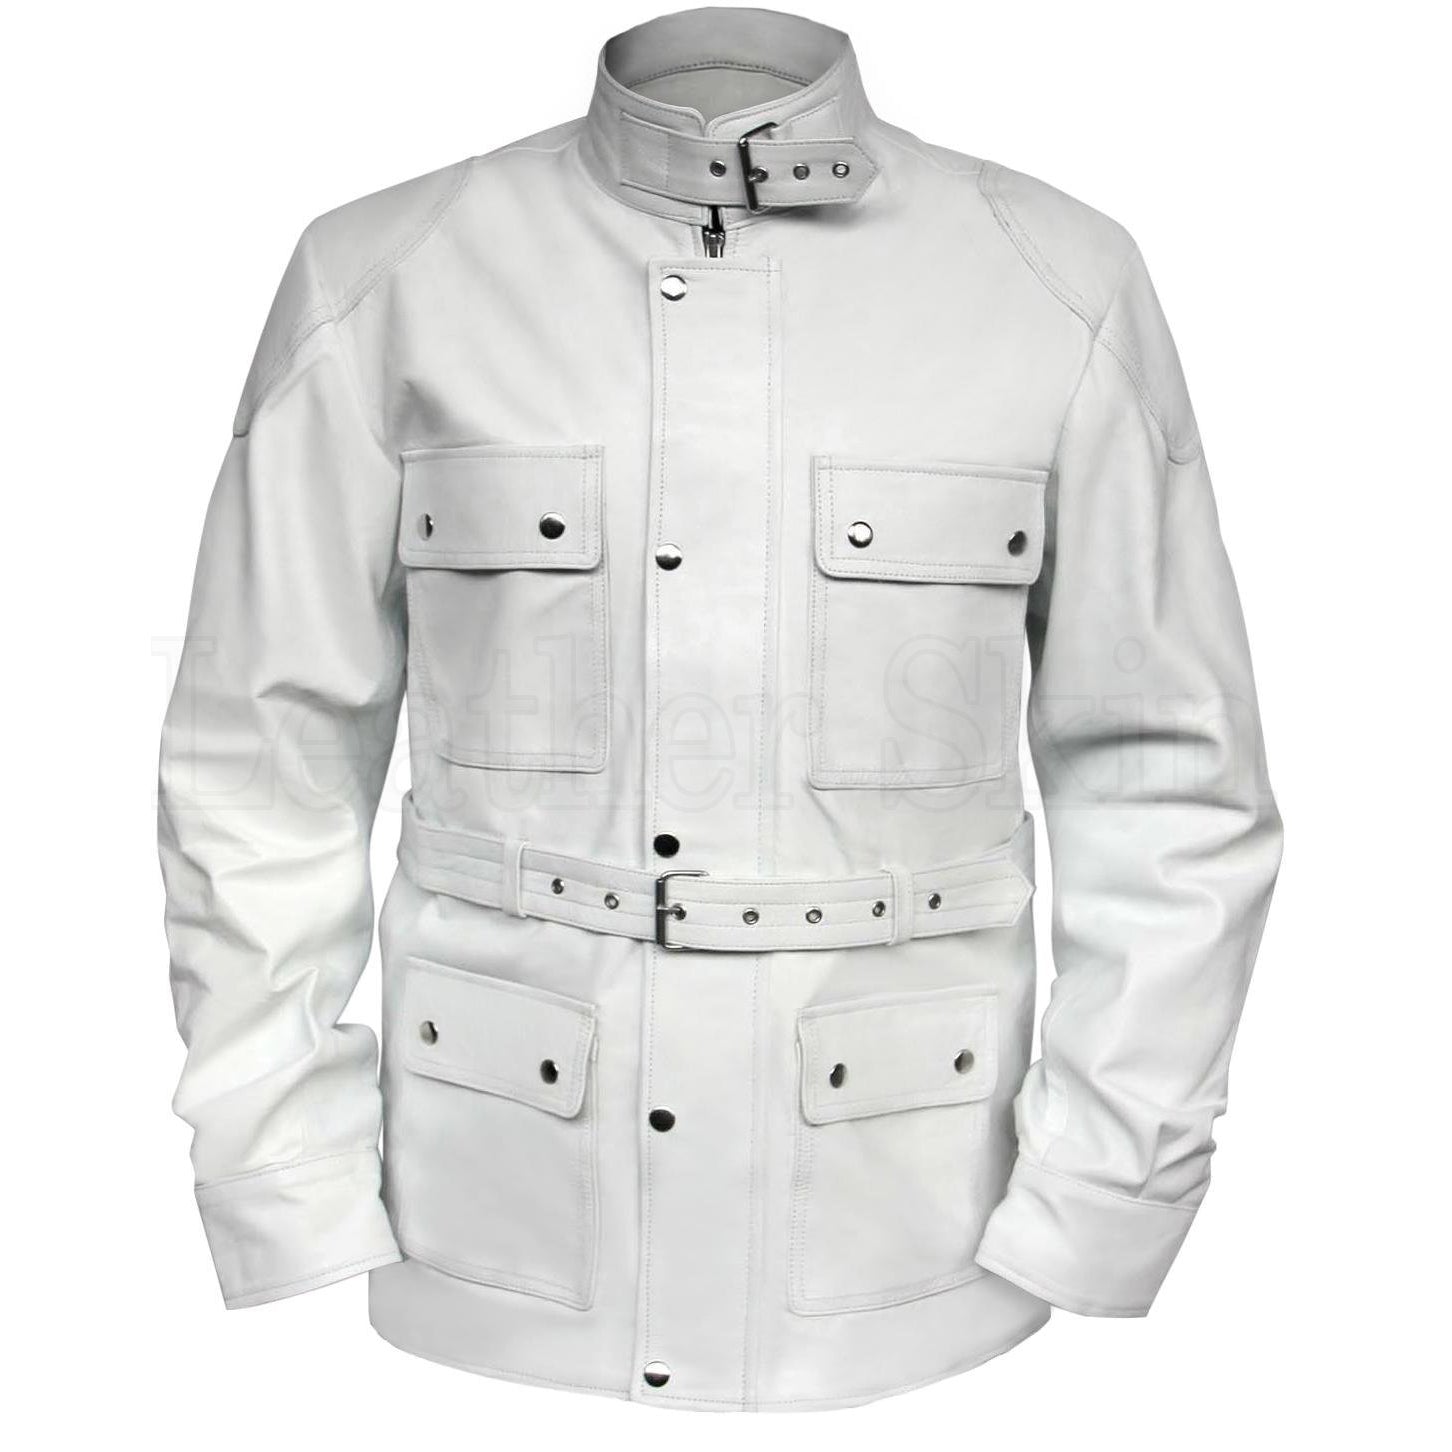 Buy The Leather Alley Leather Jacket Women White Motorcycle Size S M L XL  XXL Jackets (XXS) at Amazon.in